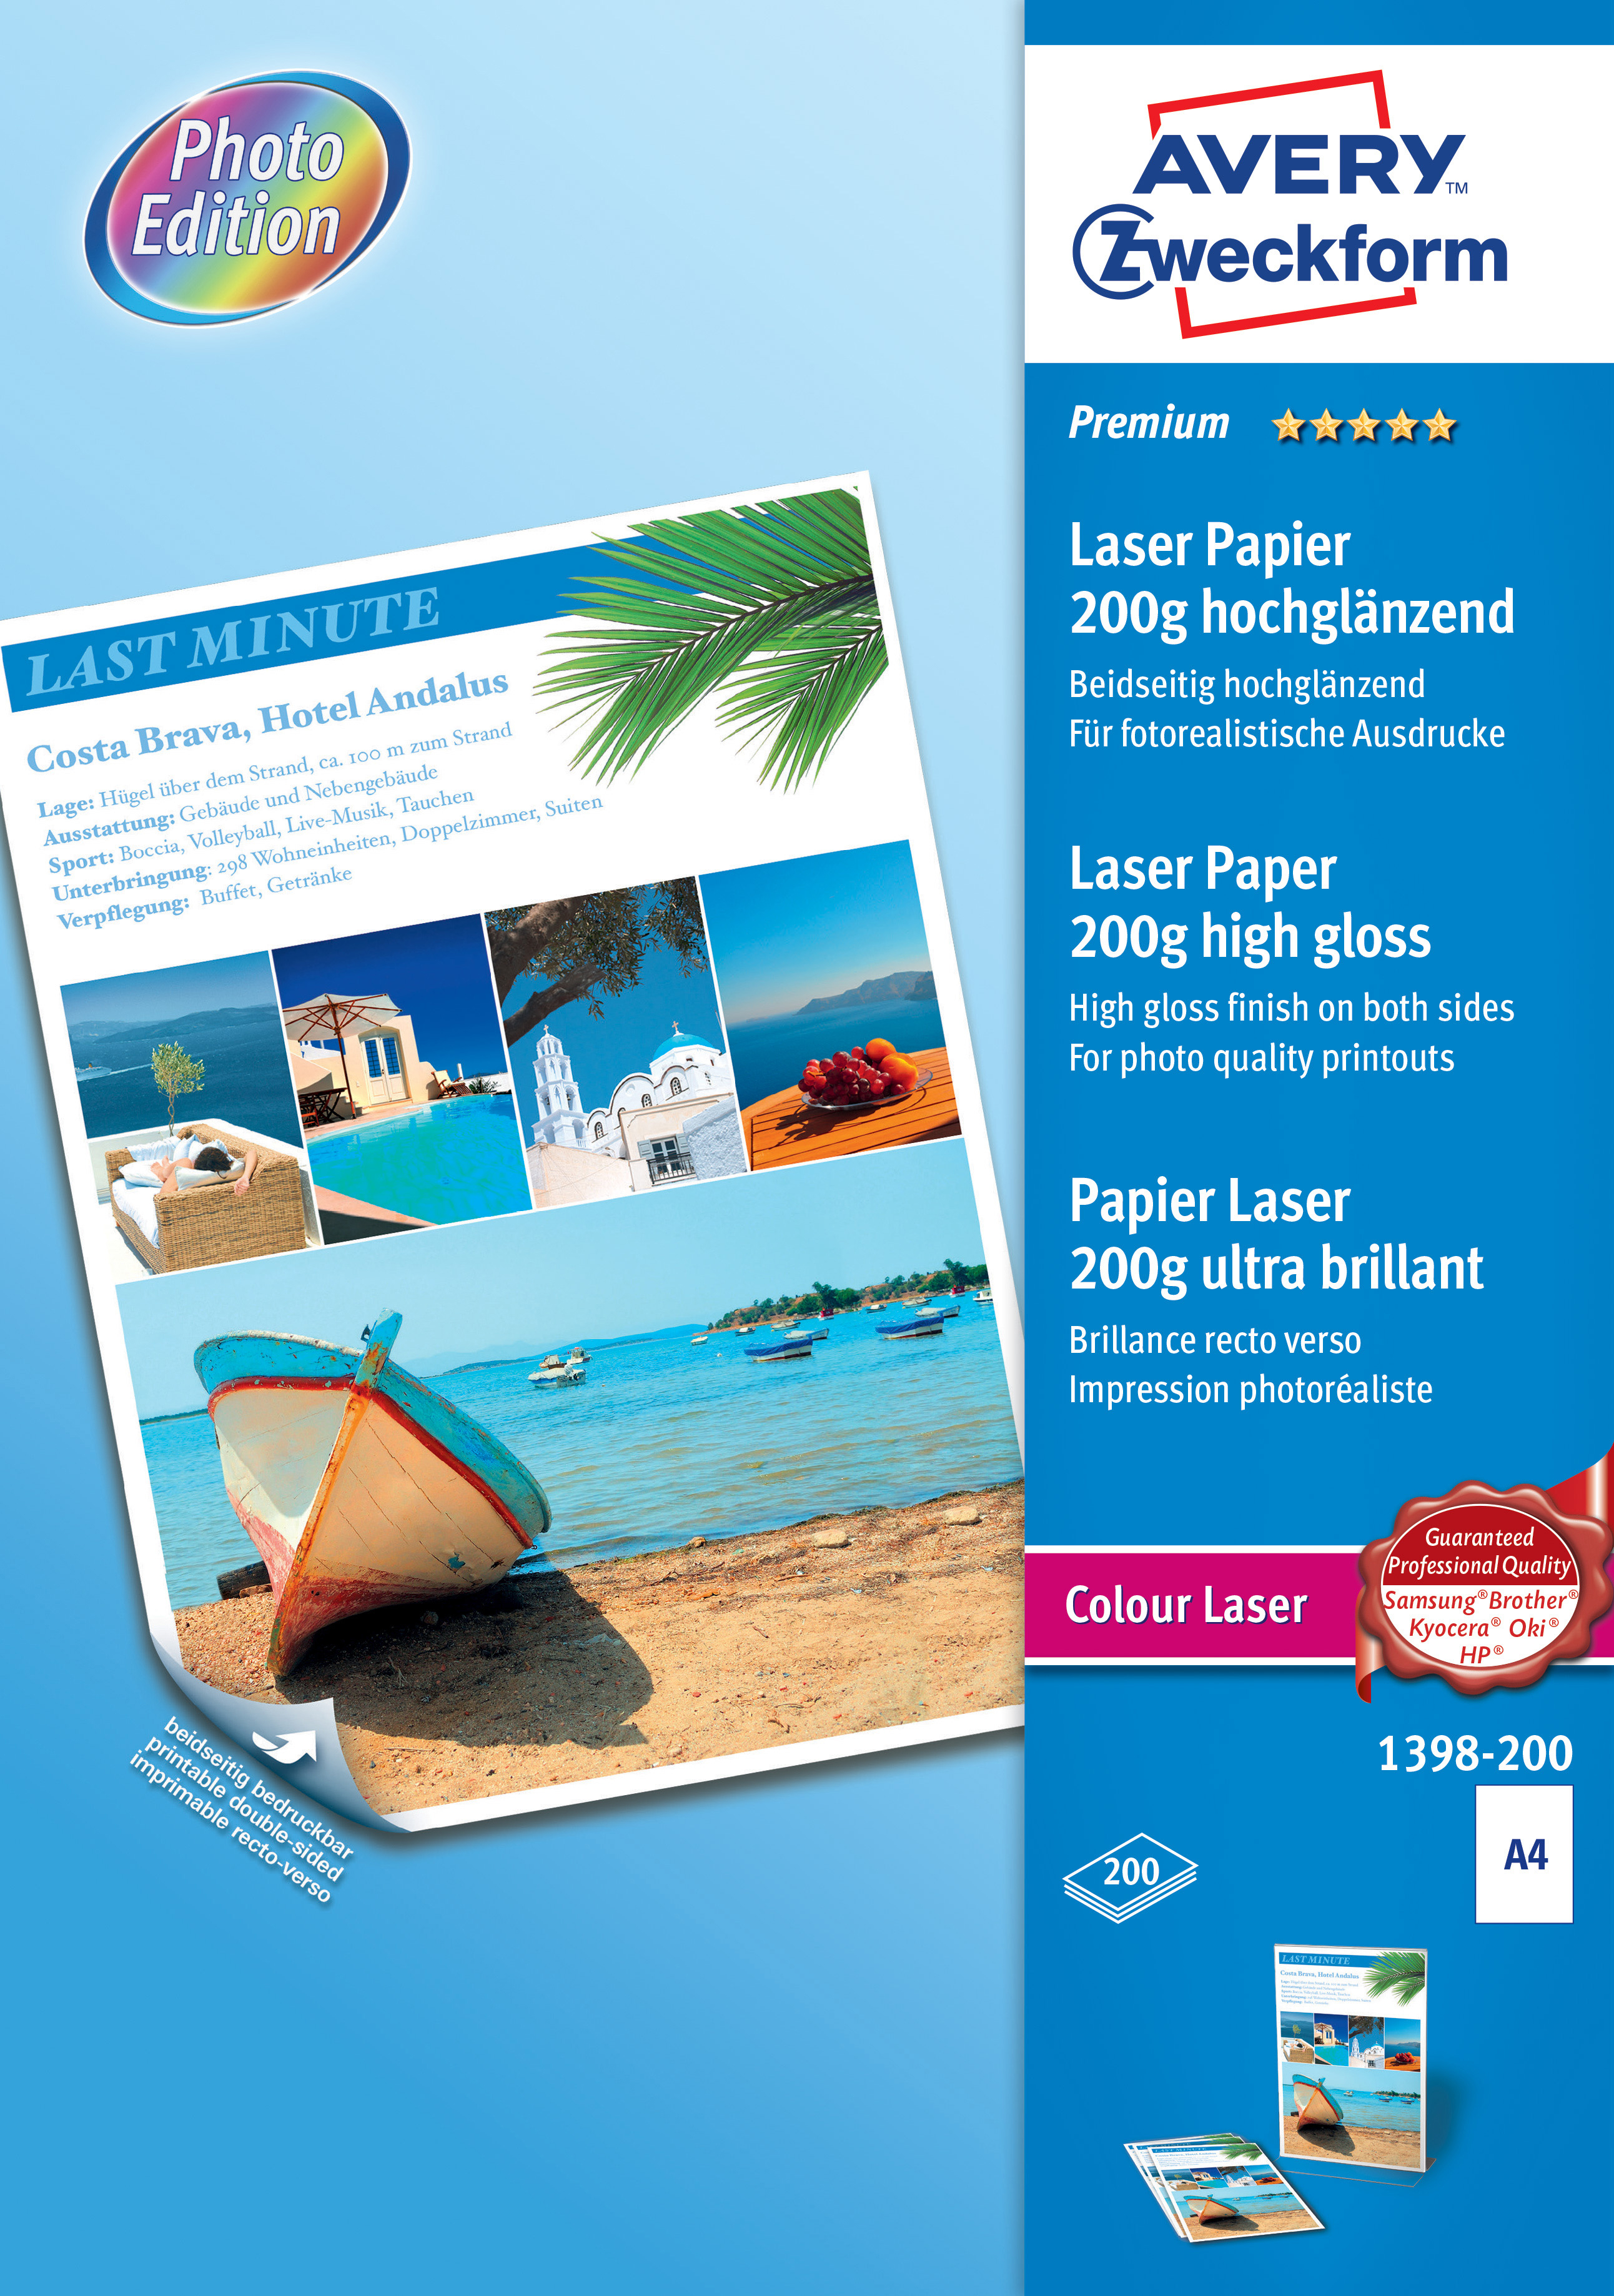 AVERY ZWECKFORM Superior Color Laser Paper A4 1398-200 200g, glossy 200 flls.